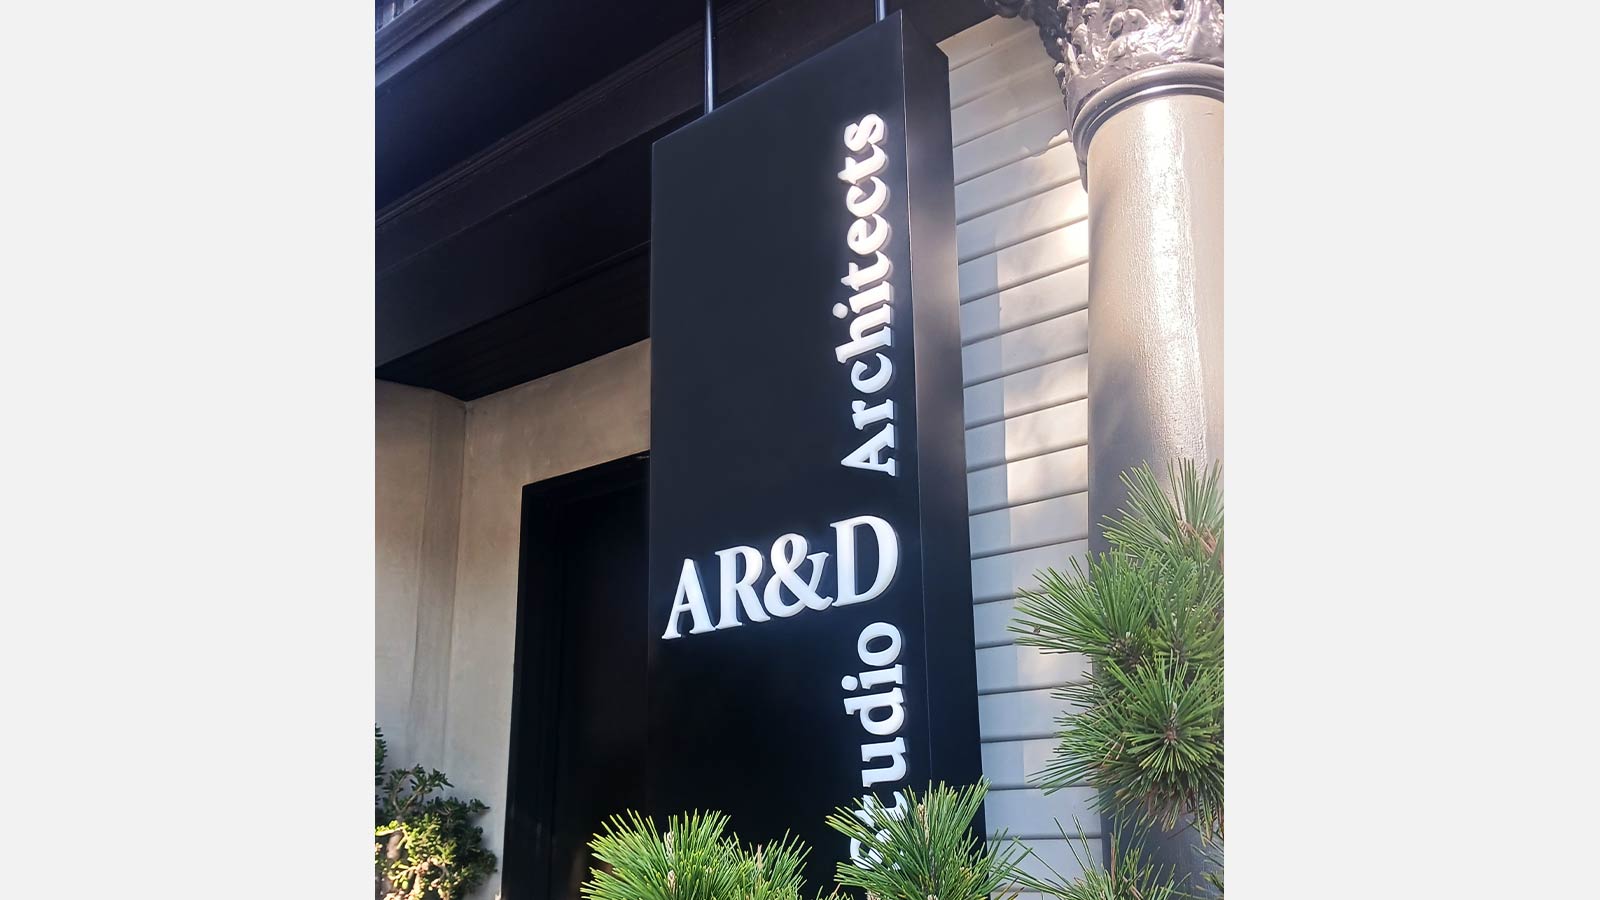 studio ar and d architects lightbox sign installed outdoors